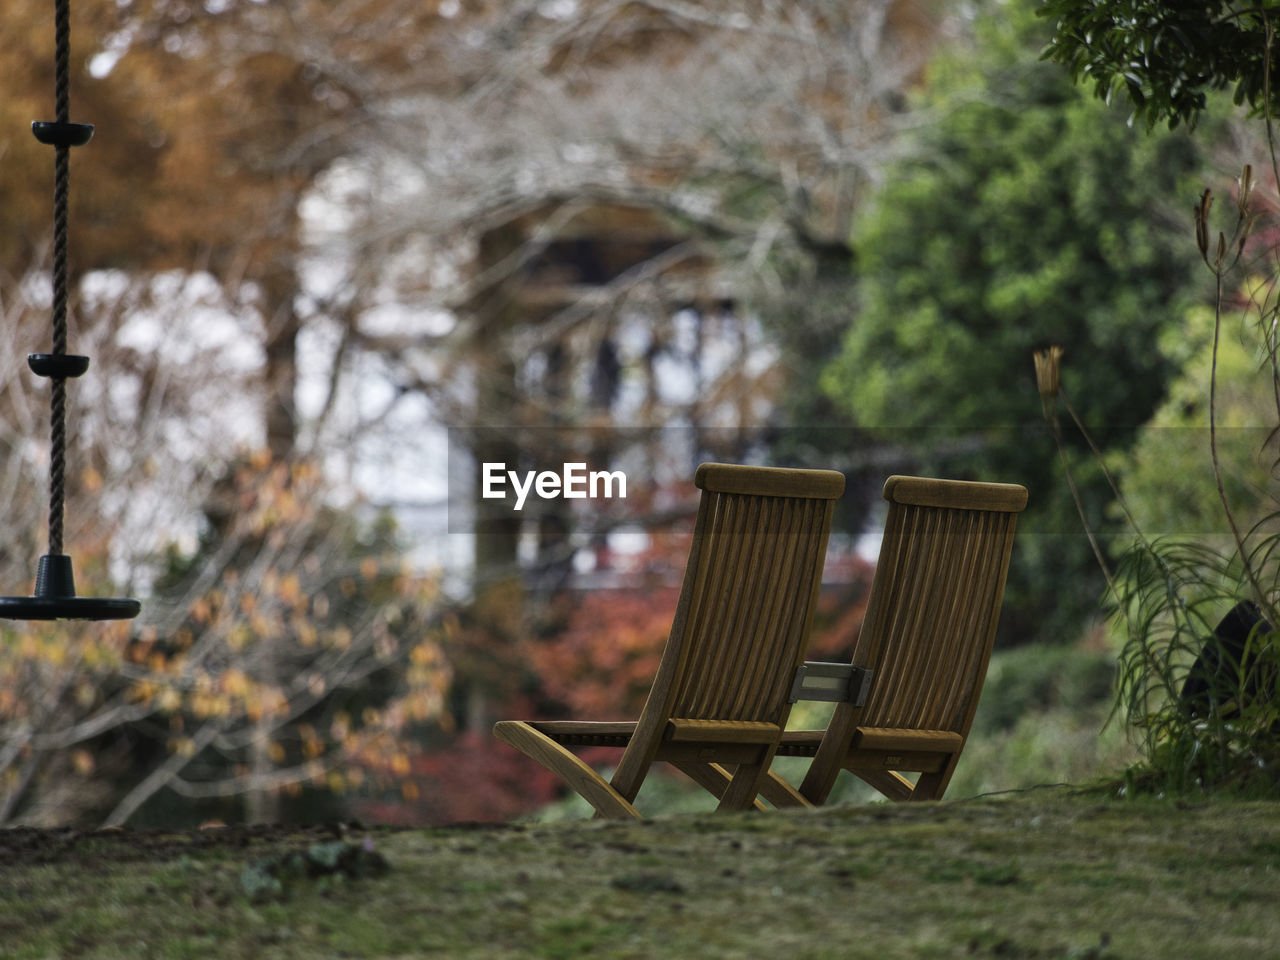 plant, seat, nature, tree, chair, absence, no people, grass, autumn, empty, day, backyard, focus on foreground, outdoors, land, tranquility, furniture, bench, green, field, rural area, growth, wood, beauty in nature, table